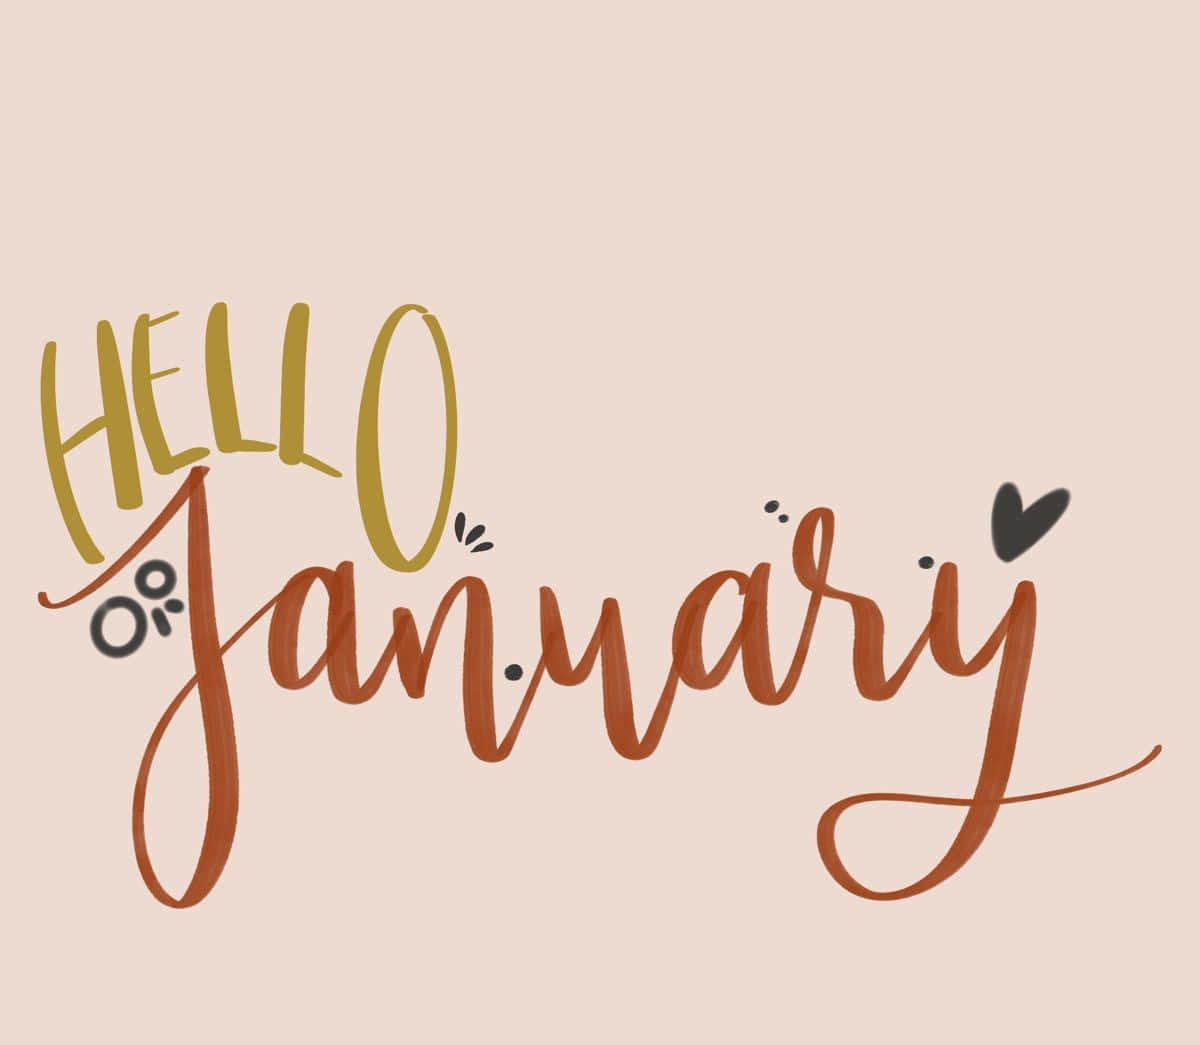 The start of a new year - Welcome January